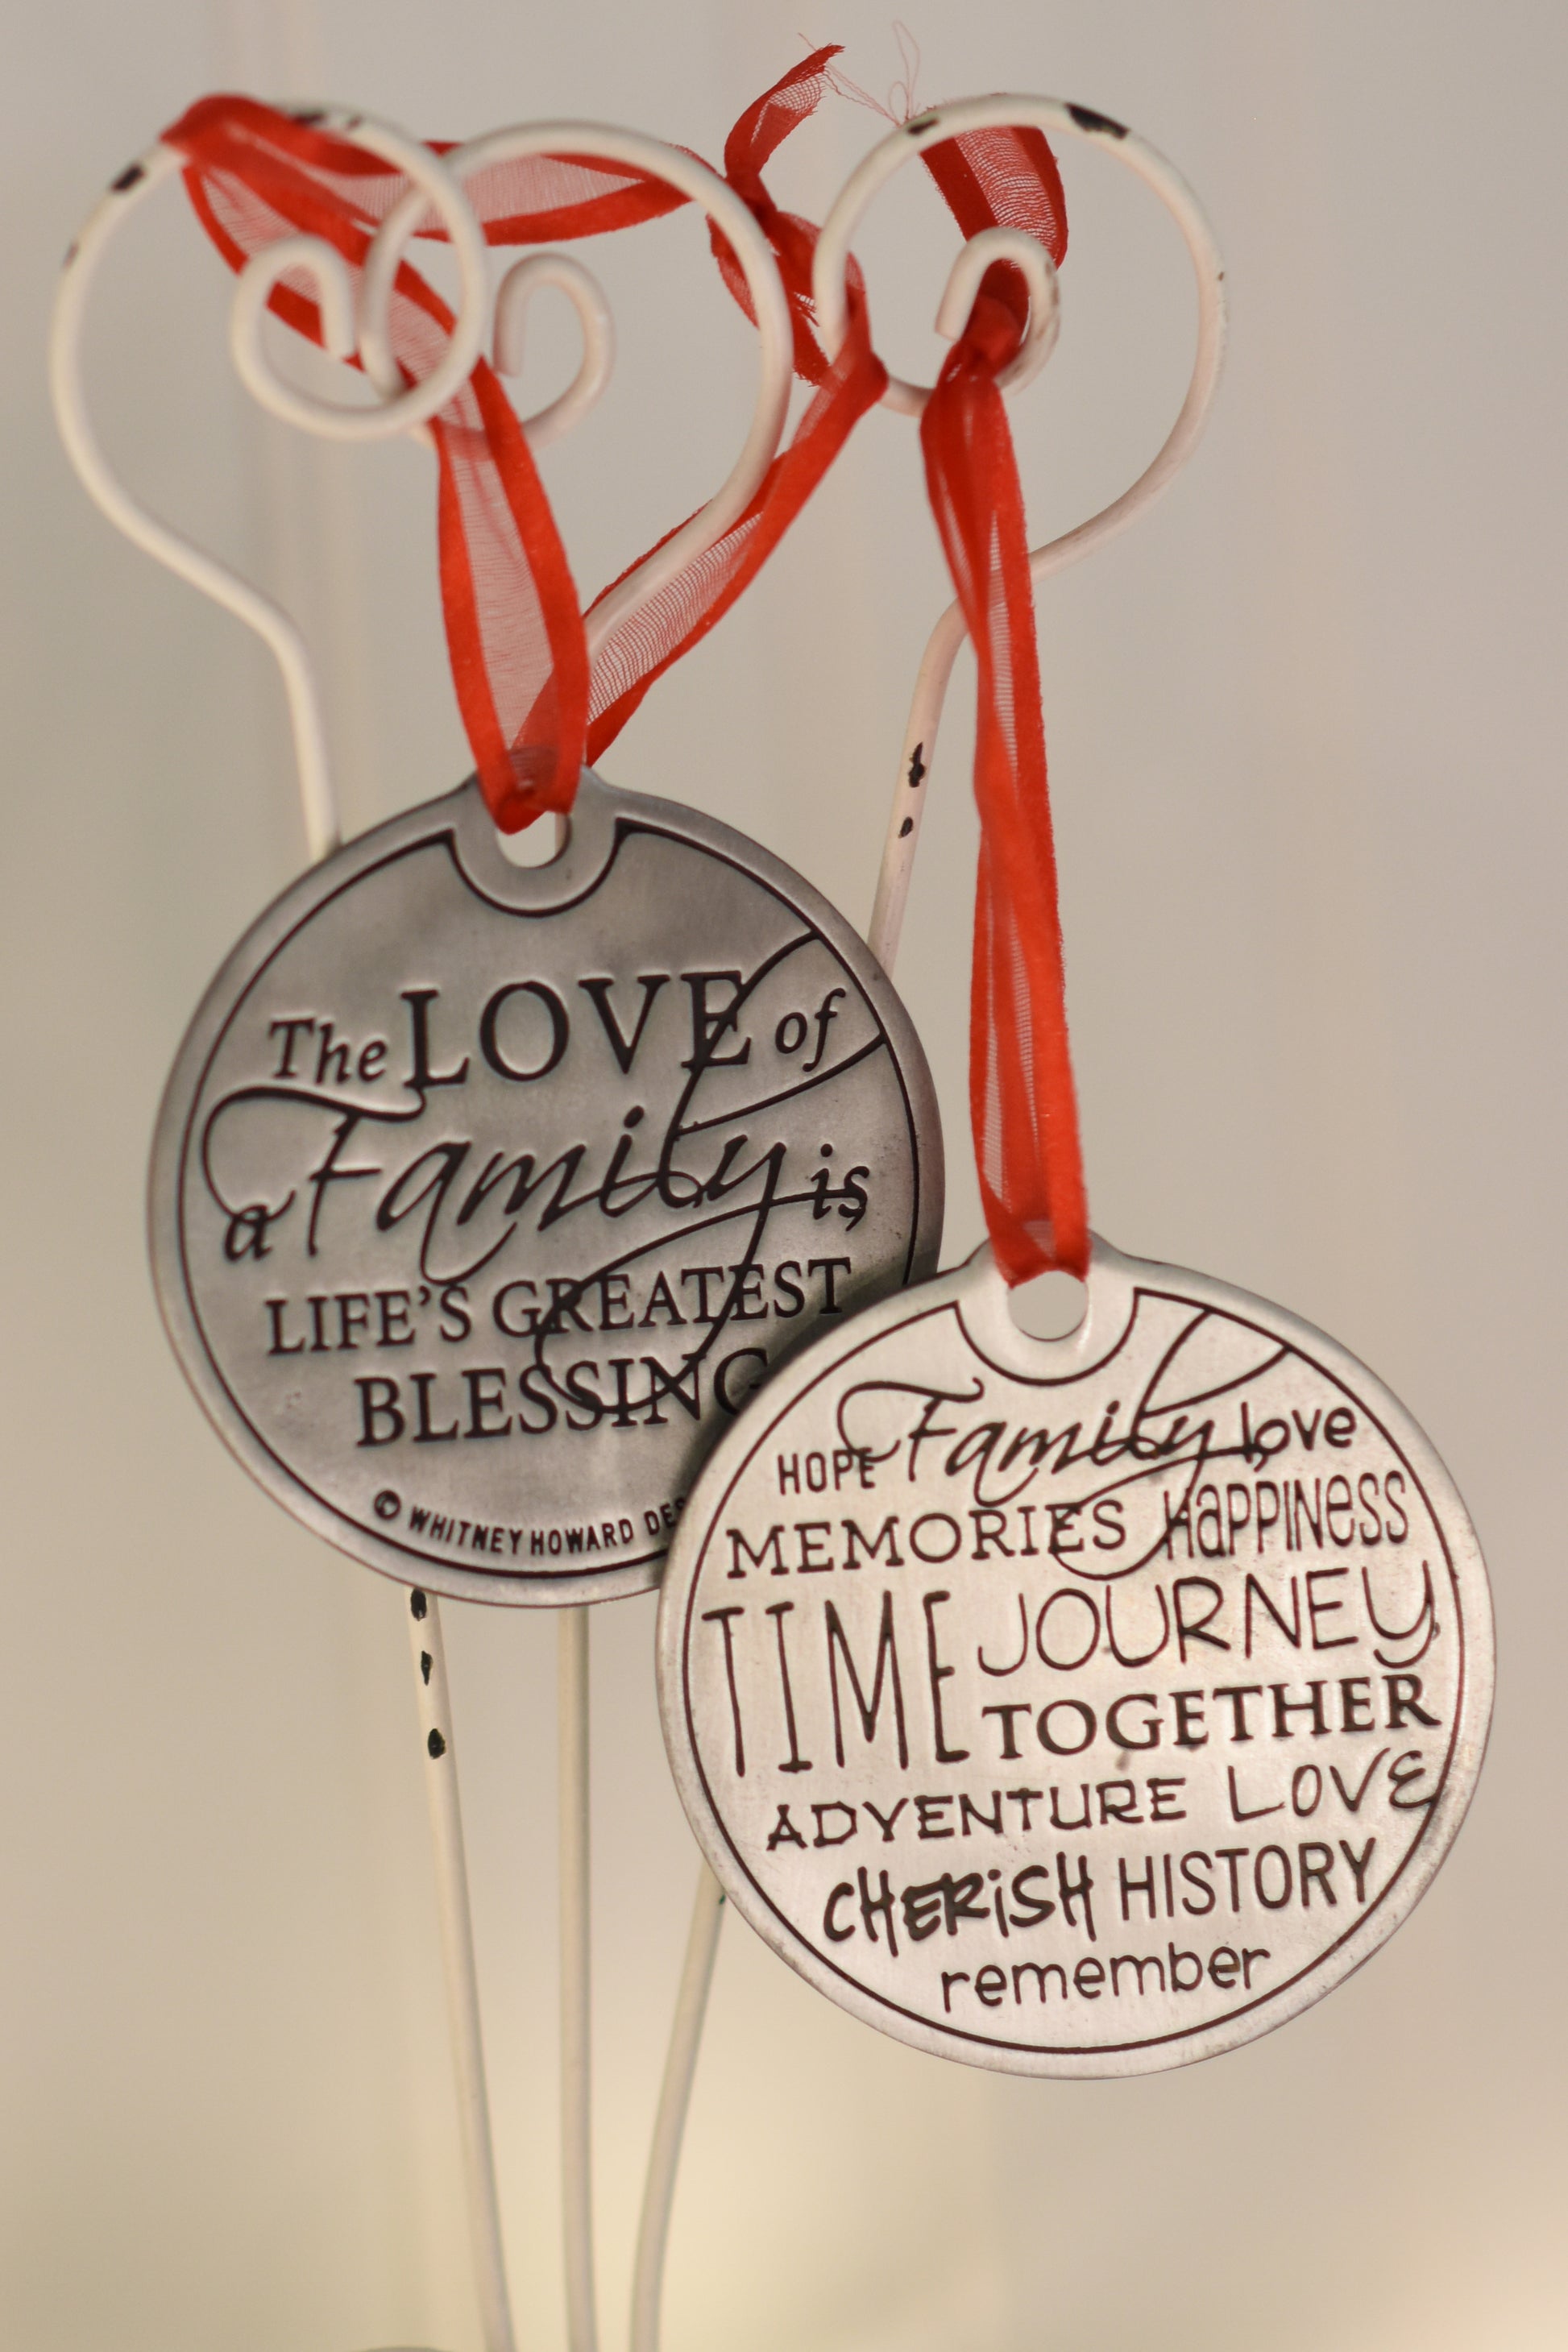 The Love of a Family is Life's Greatest Blessing Holiday Ornament front and back hanging on wire pole